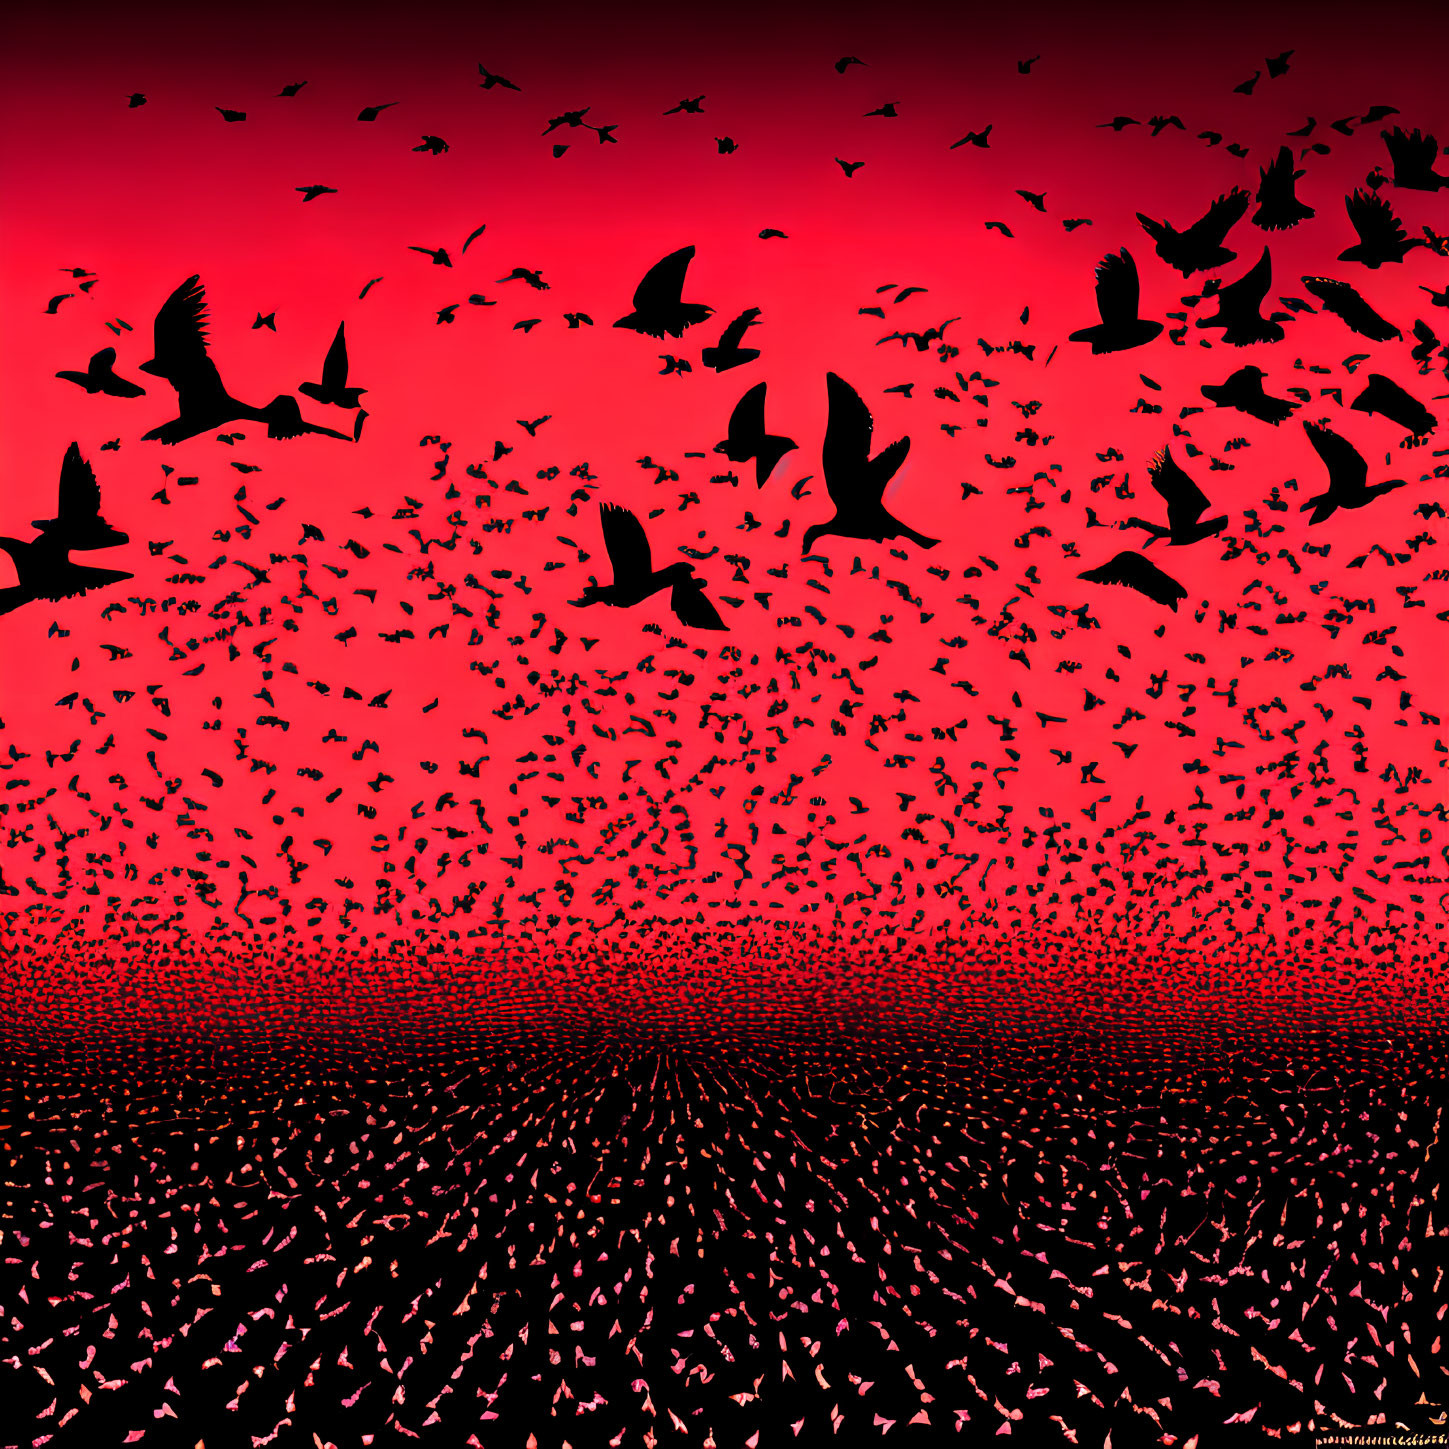 Flock of Birds Silhouetted Against Vibrant Red Sky